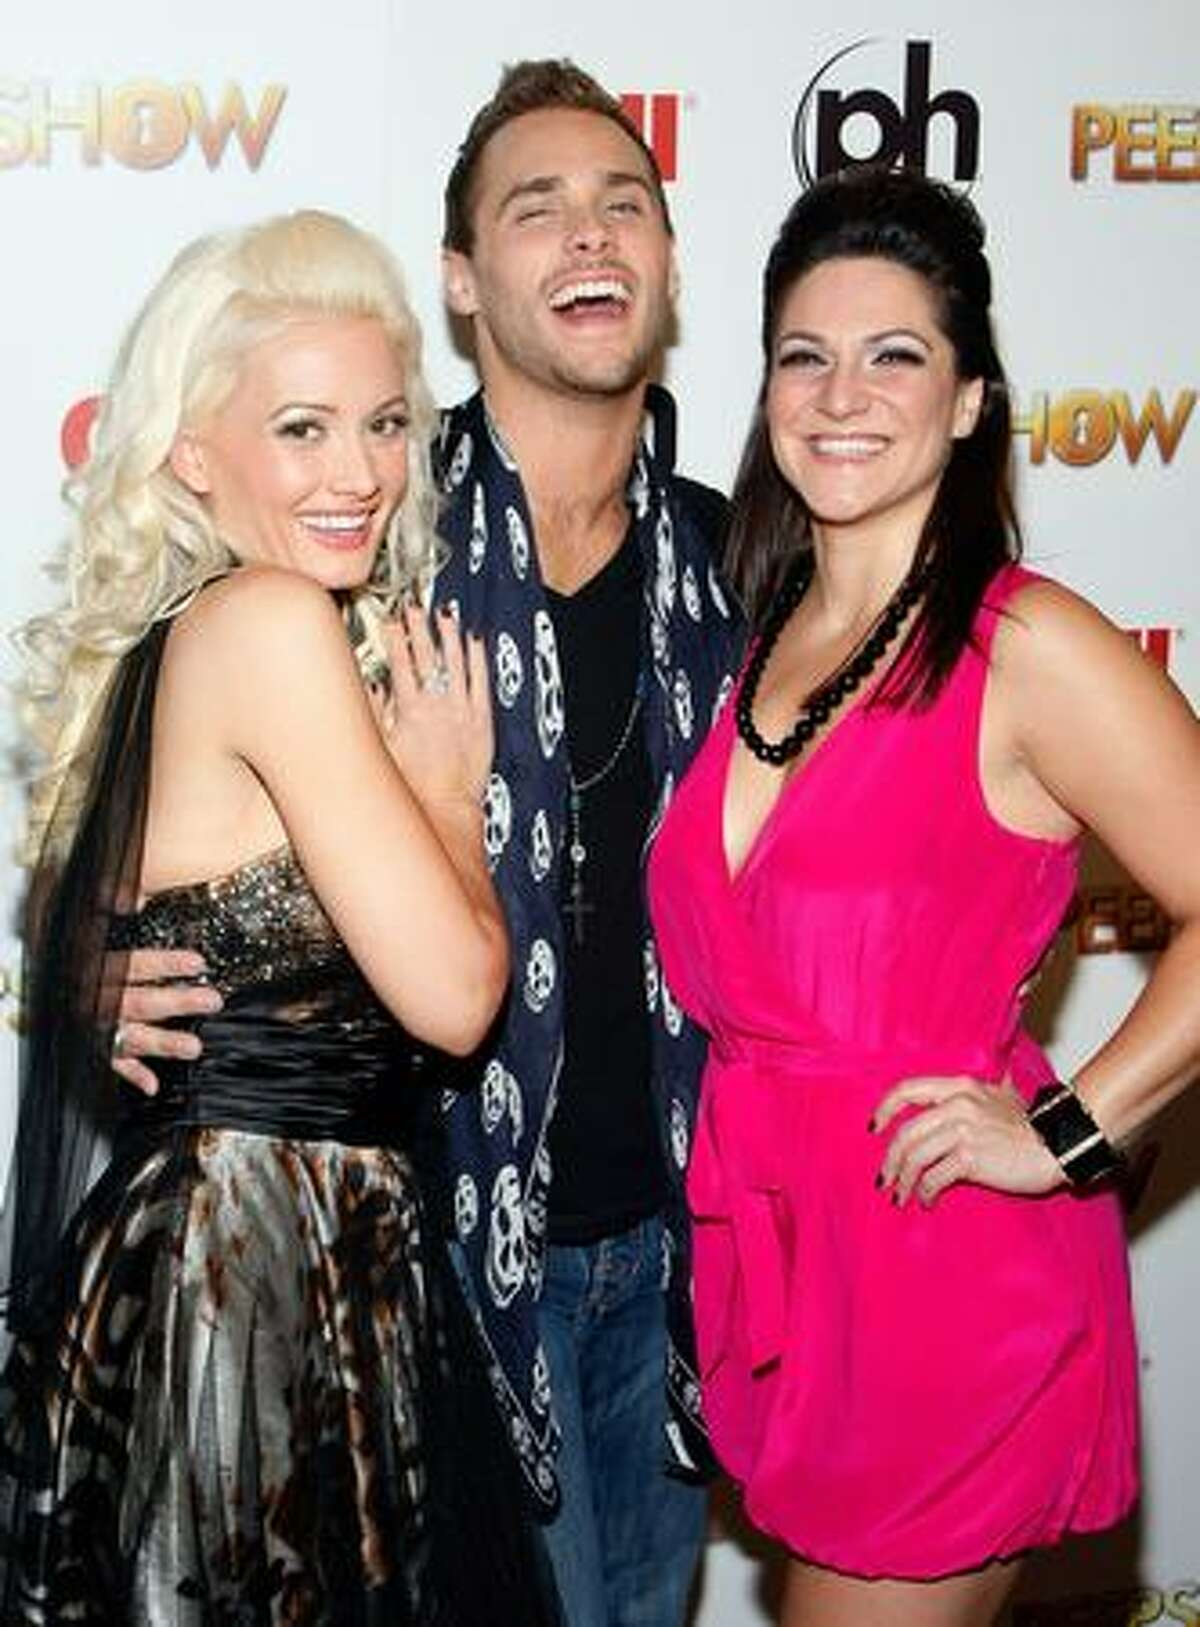 Television personality and model Holly Madison, singer Josh Strickland and actress Shoshana Bean appear at the after party for the adult production "PEEPSHOW" at the Planet Hollywood Resort & Casino in Las Vegas, Nevada.